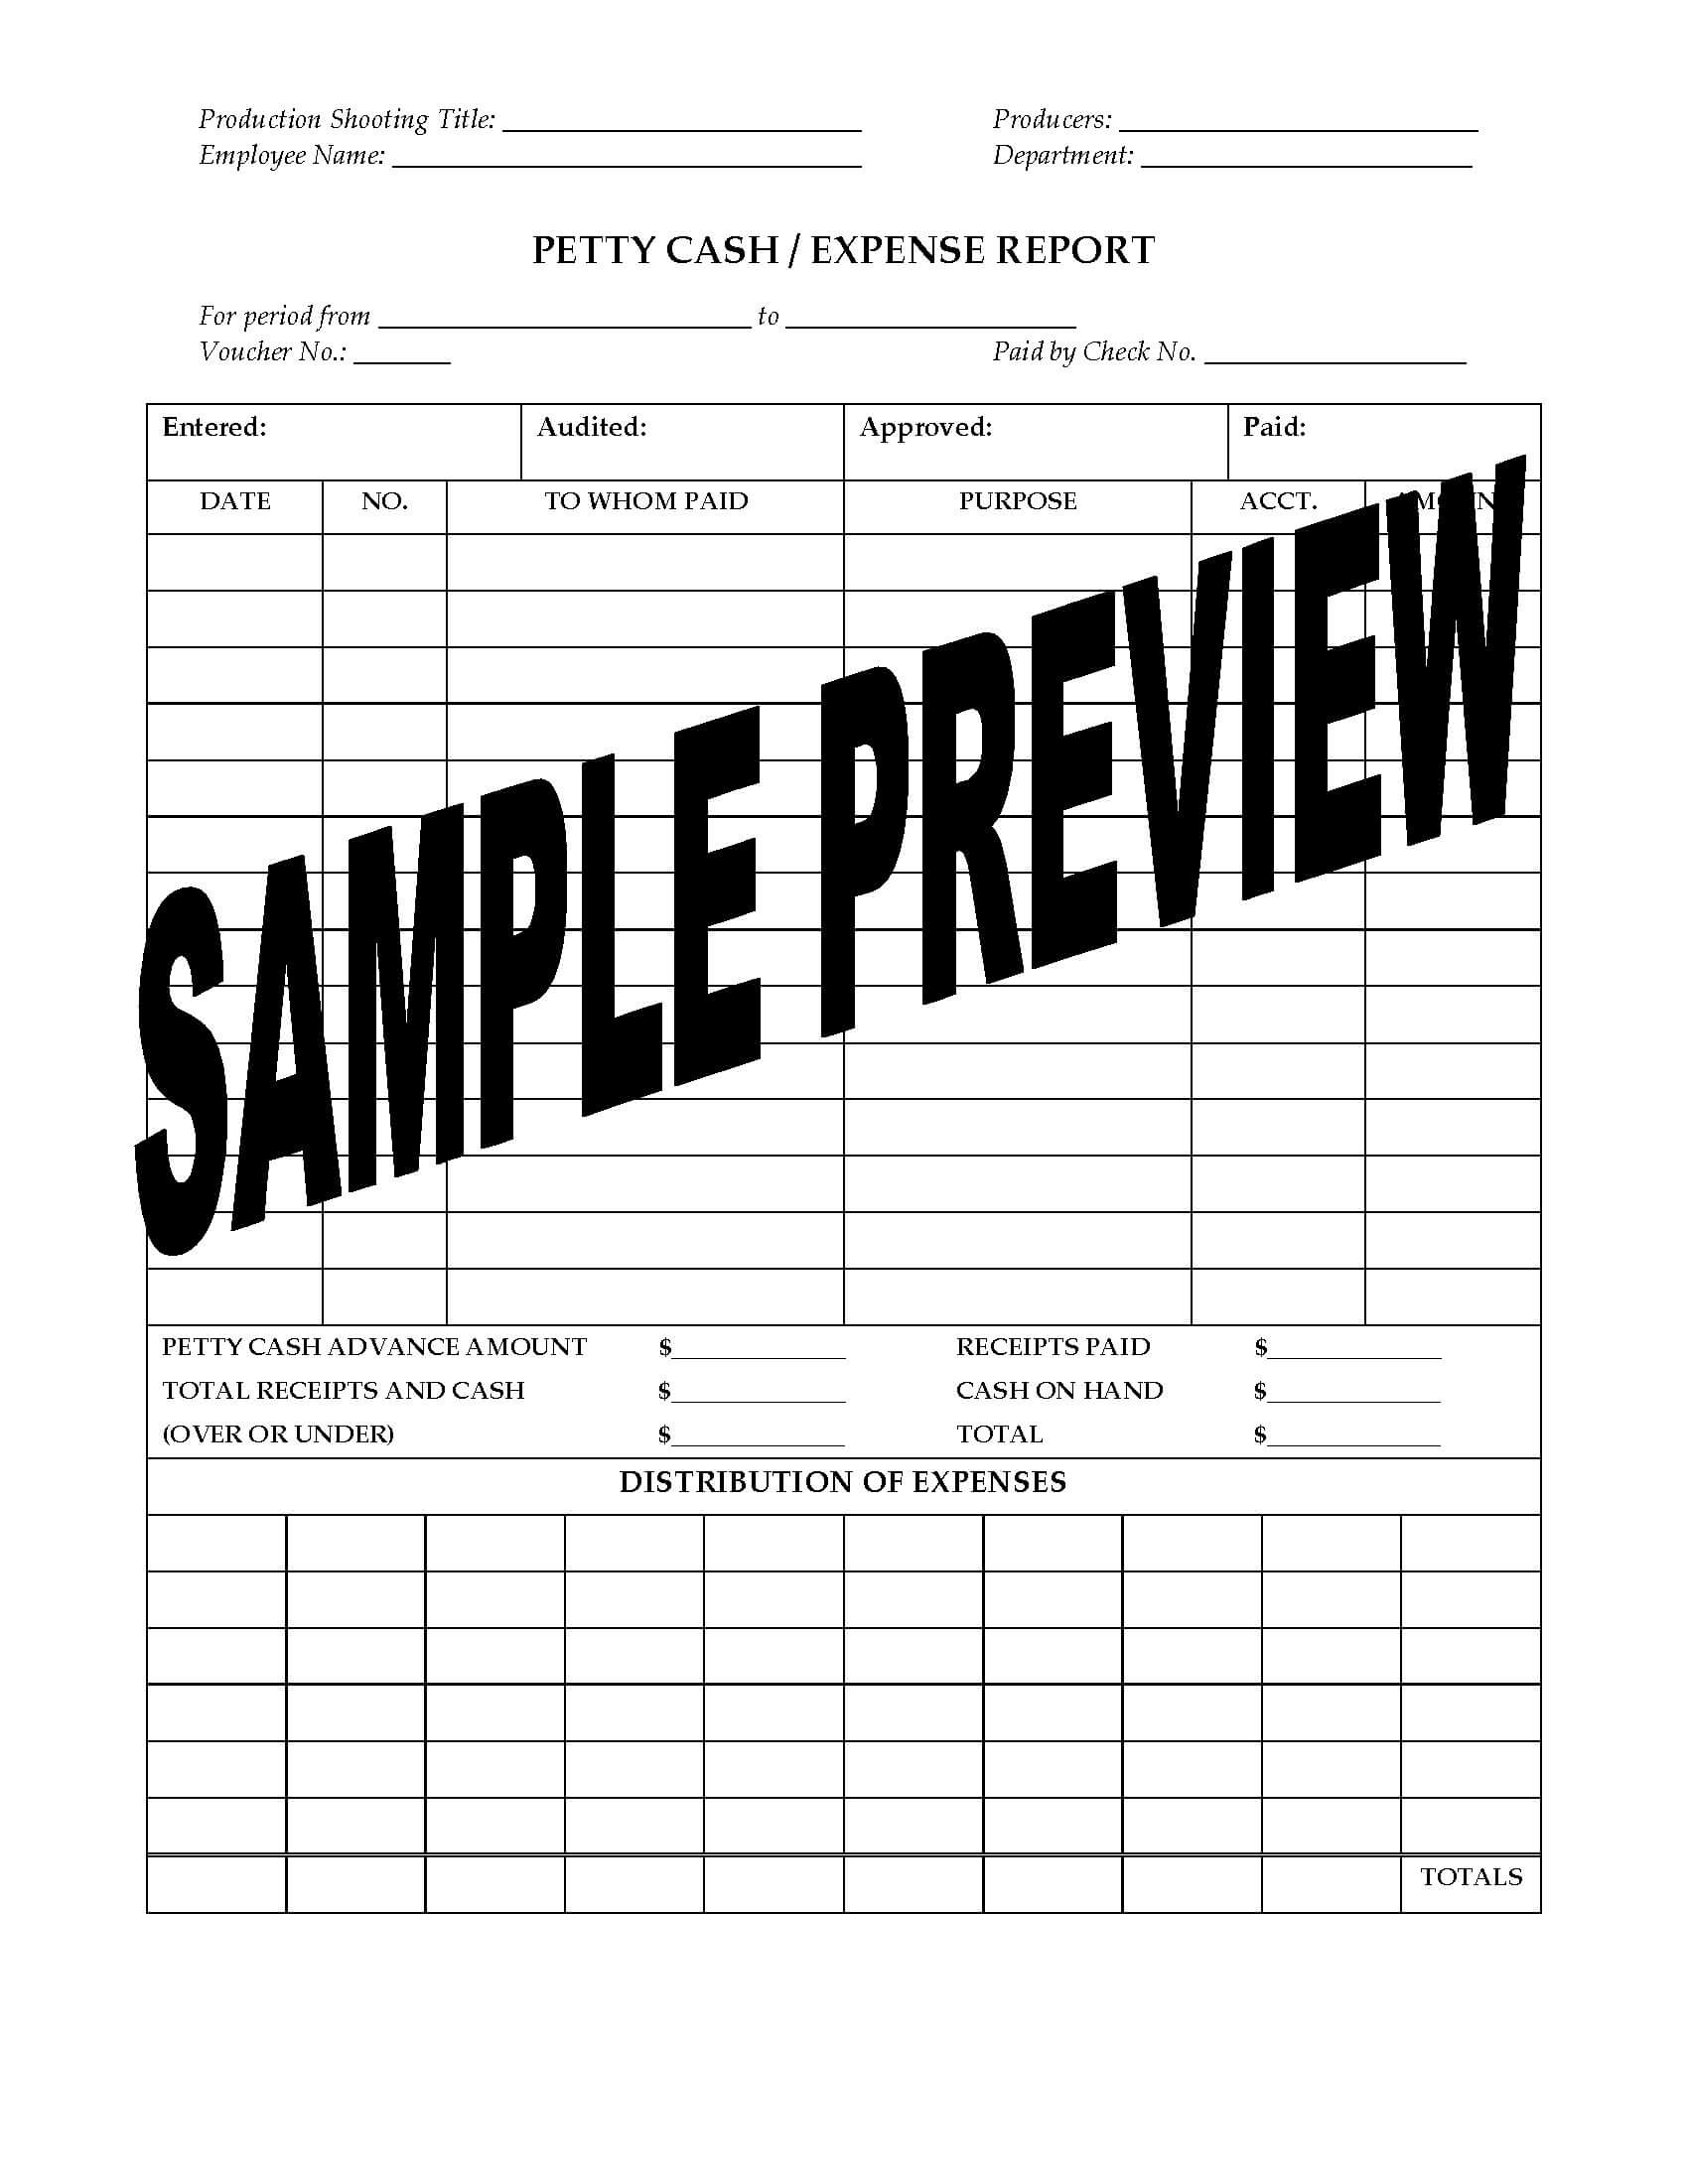 Petty Cash Expense Report For Film Or Tv Production In Petty Cash Expense Report Template